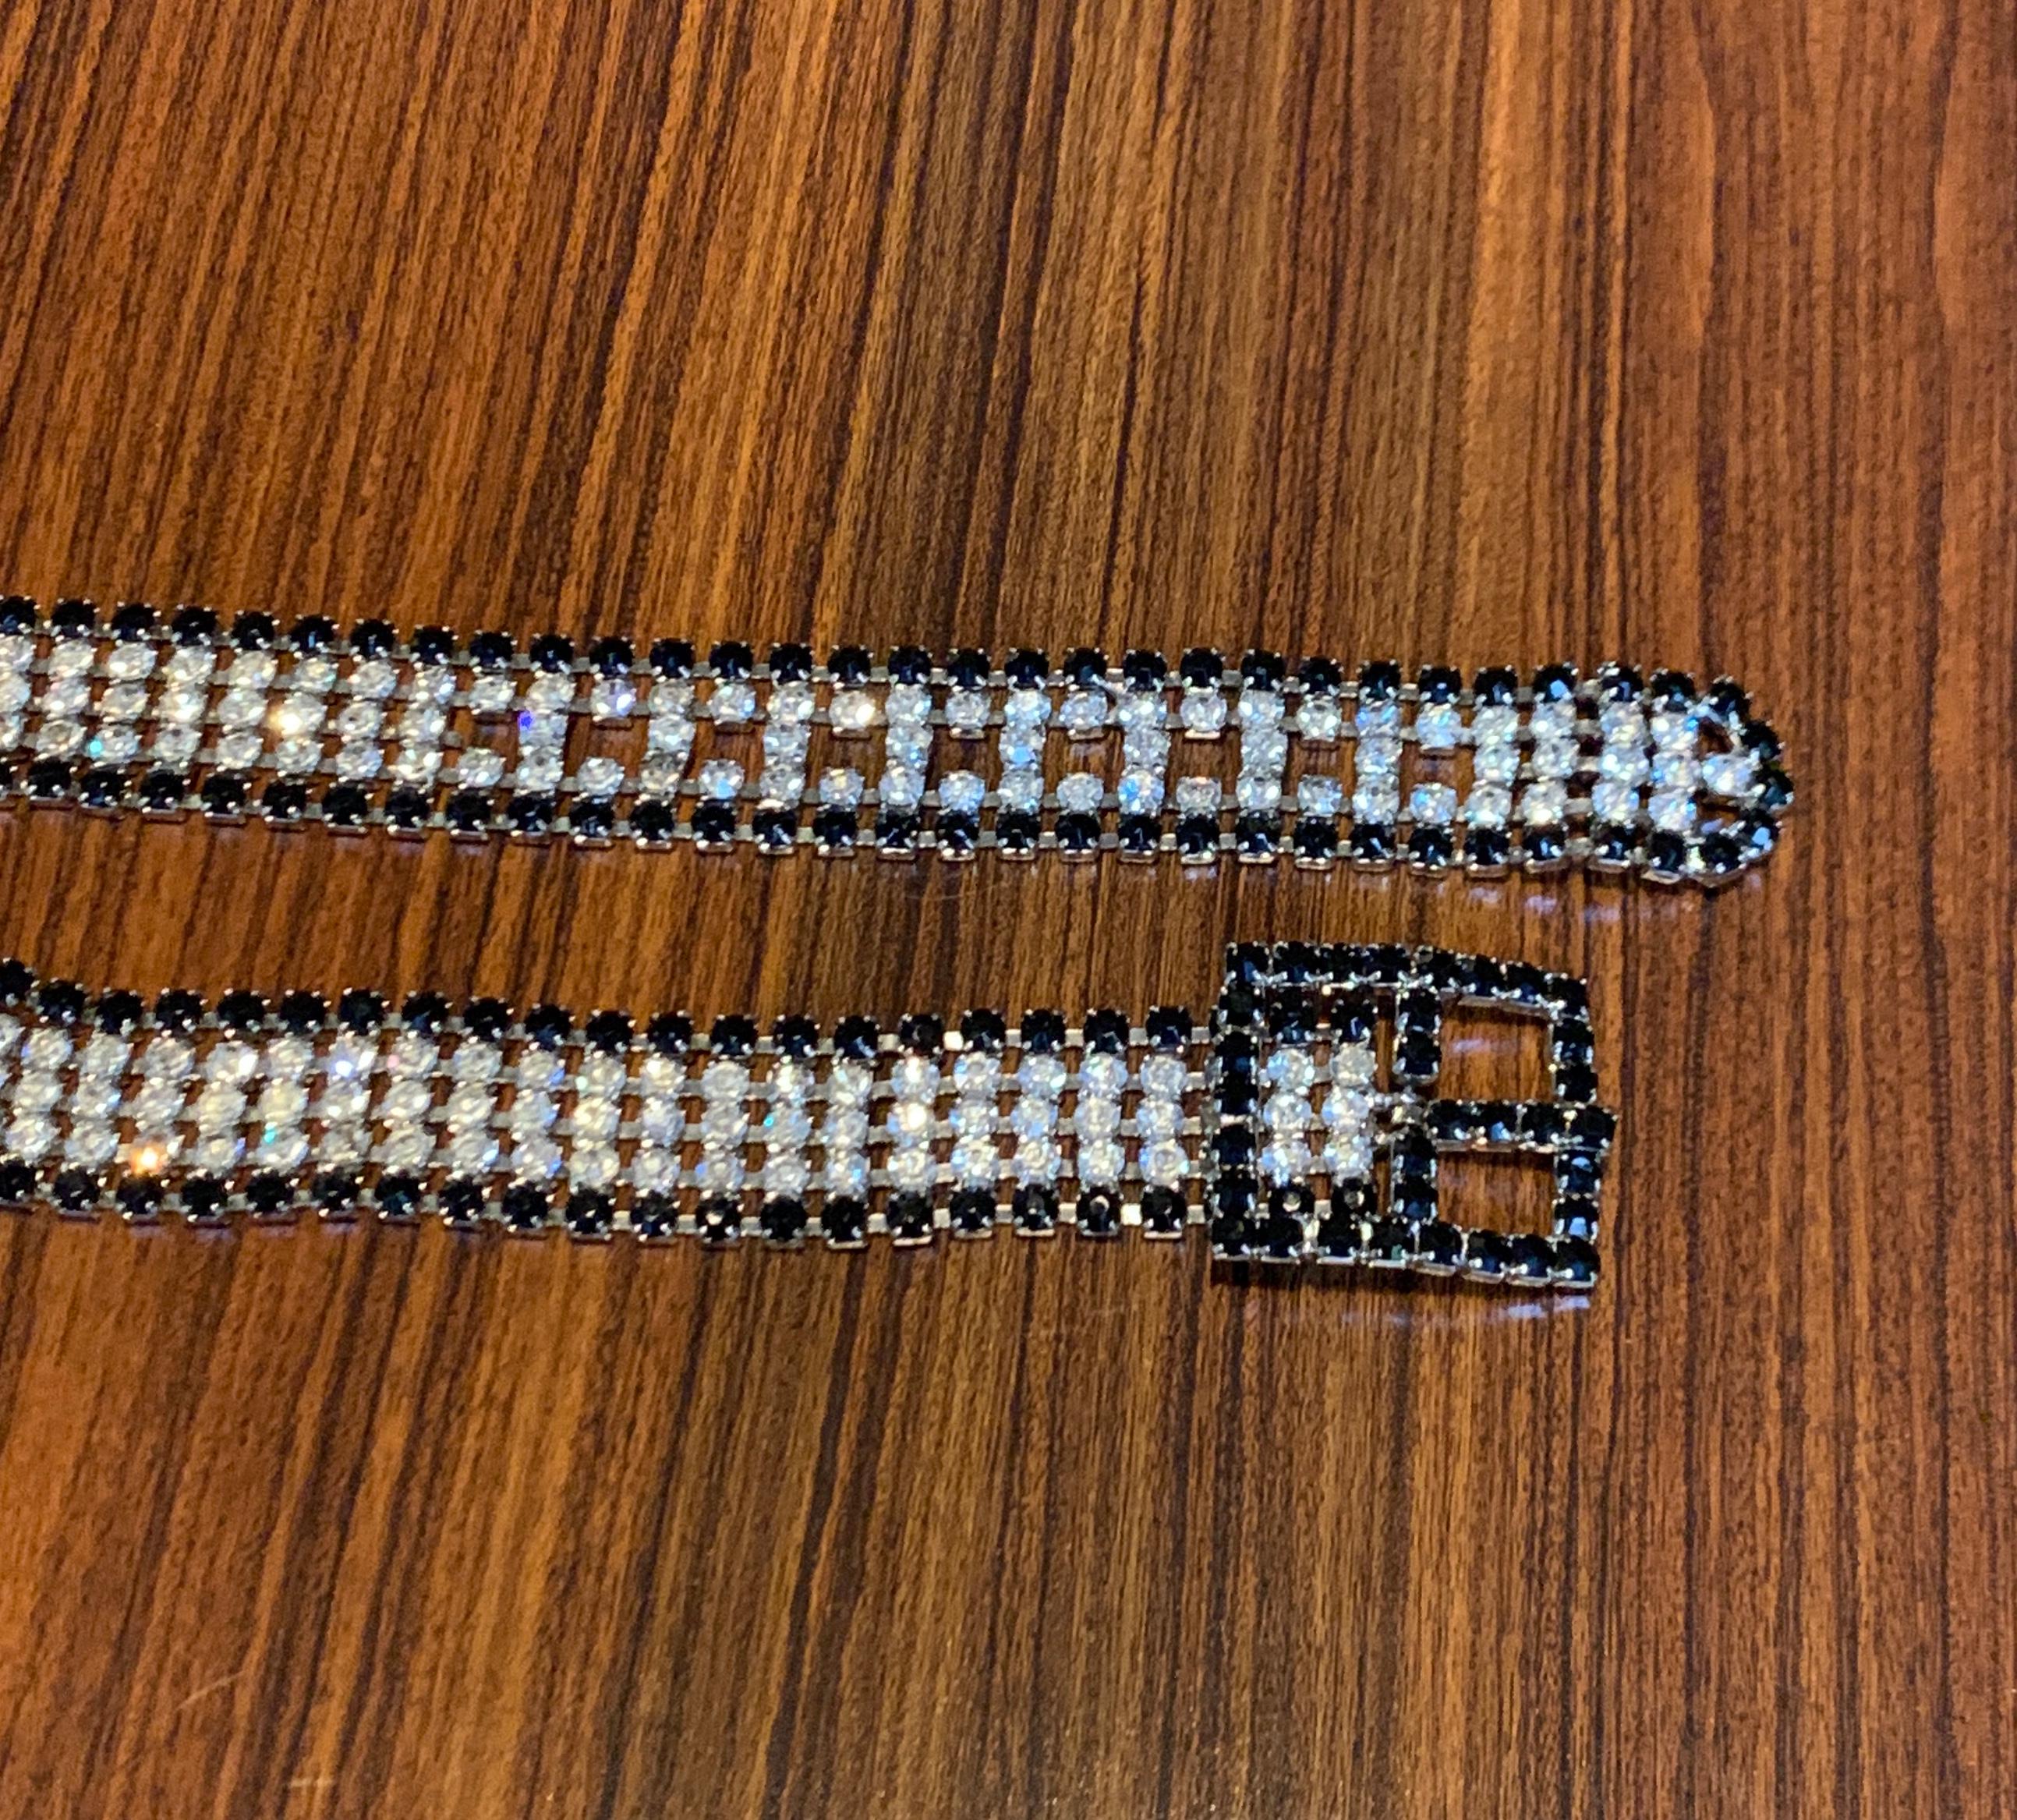 1970s Black and White Rhinestone Belt In Excellent Condition For Sale In San Francisco, CA